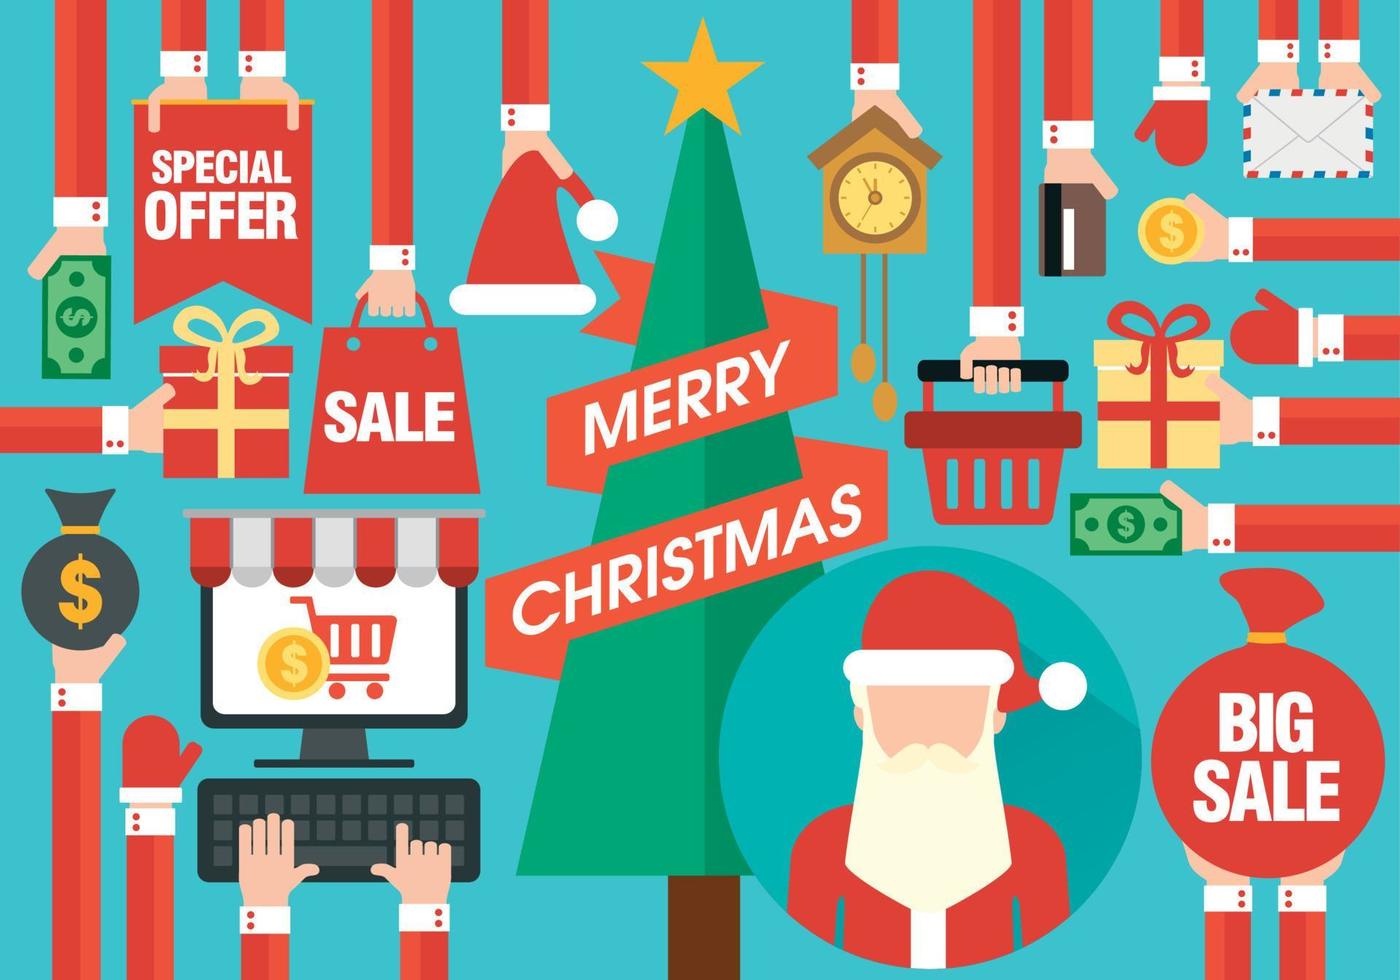 Merry Christmas sale concept design flat with Christmas tree and Santa Claus vector